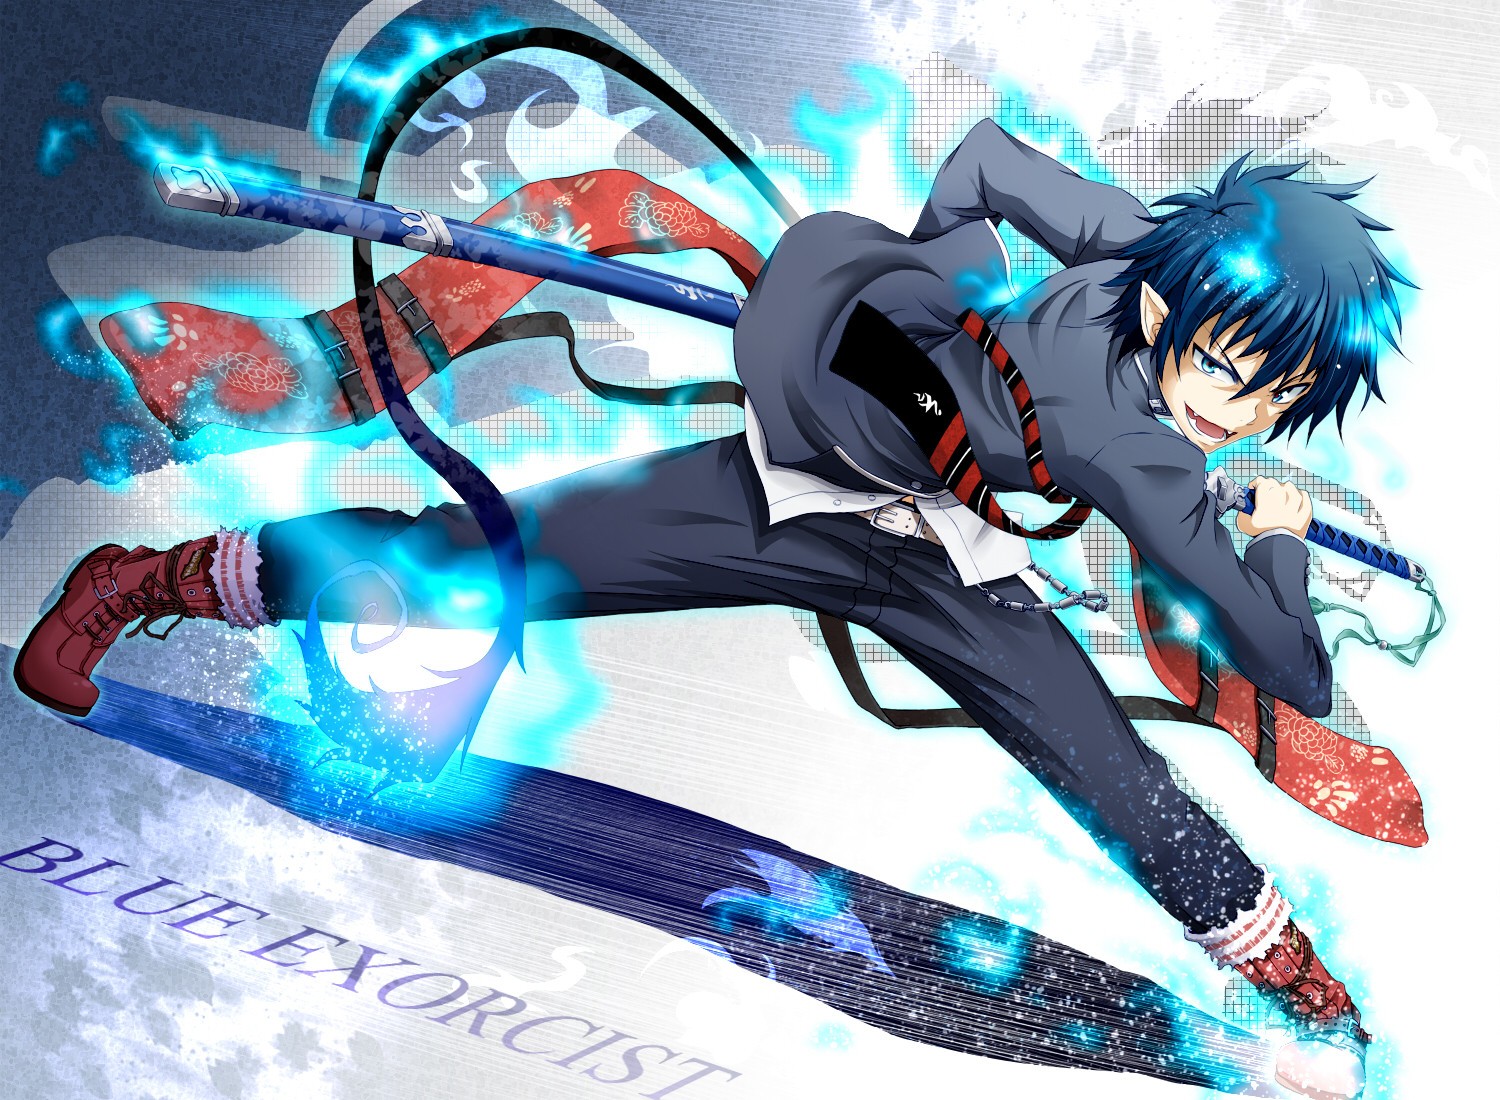 1. "Blue Exorcist" - wide 4